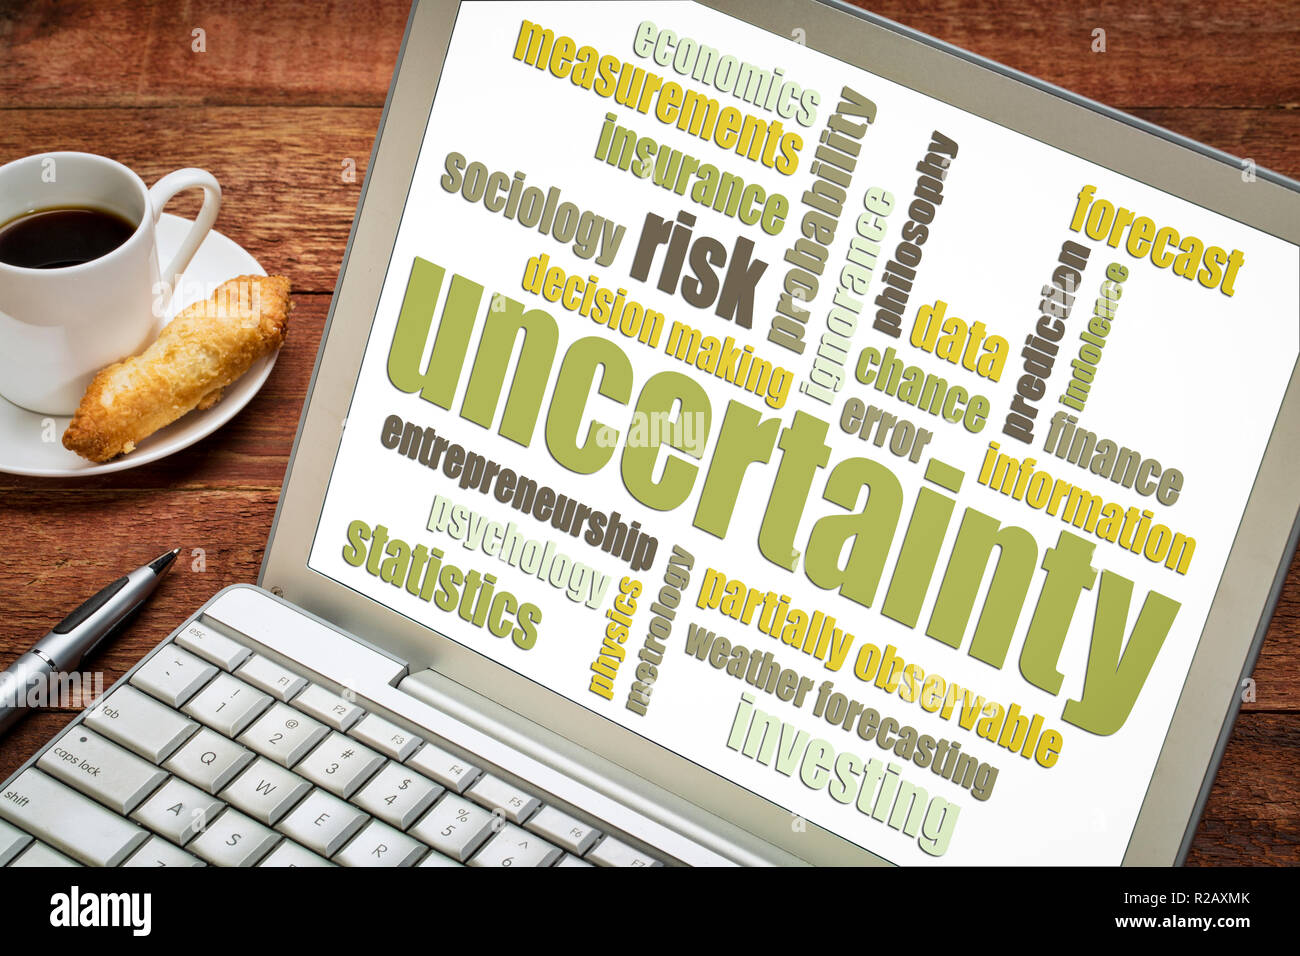 uncertainty and risk word cloud on a laptop with a cup of coffee Stock Photo